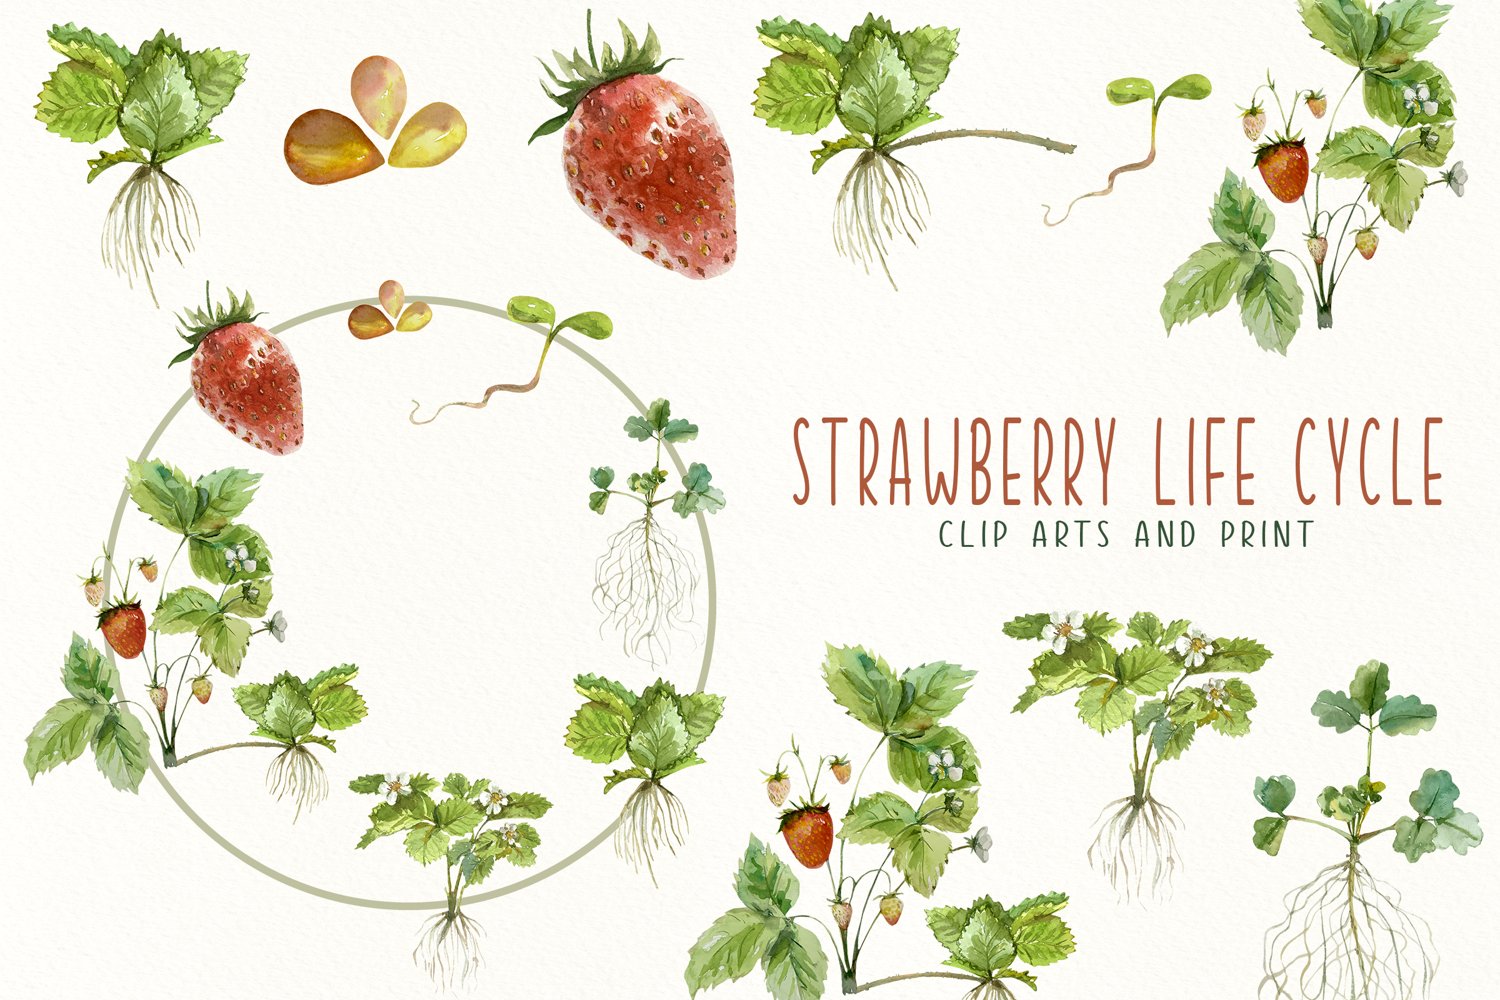 Cover image of Strawberry Life Cycle Clip Arts and Print.